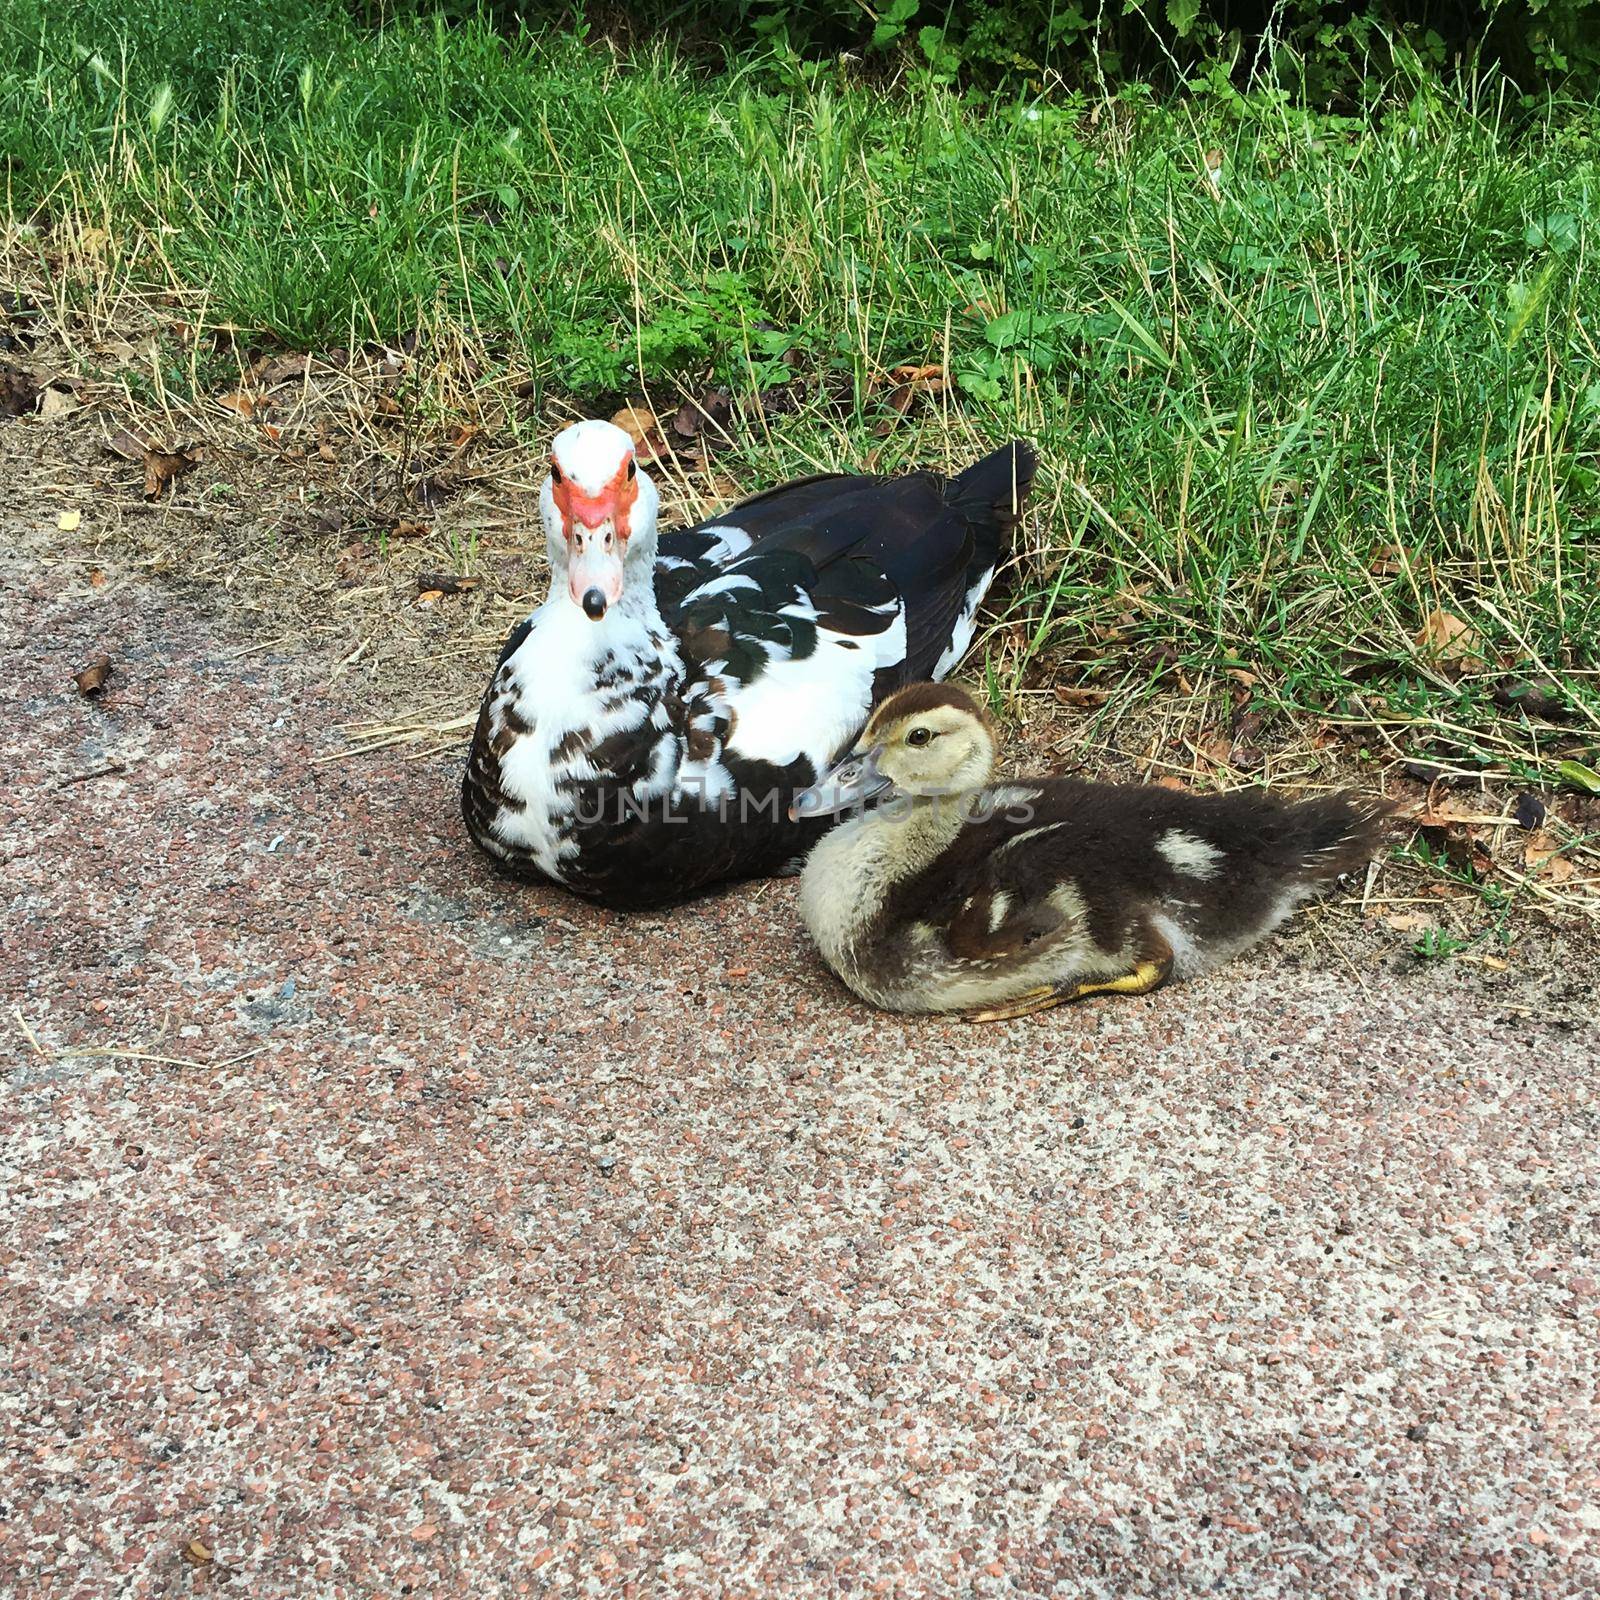 A Muscovy duck and her duckling by Bwise